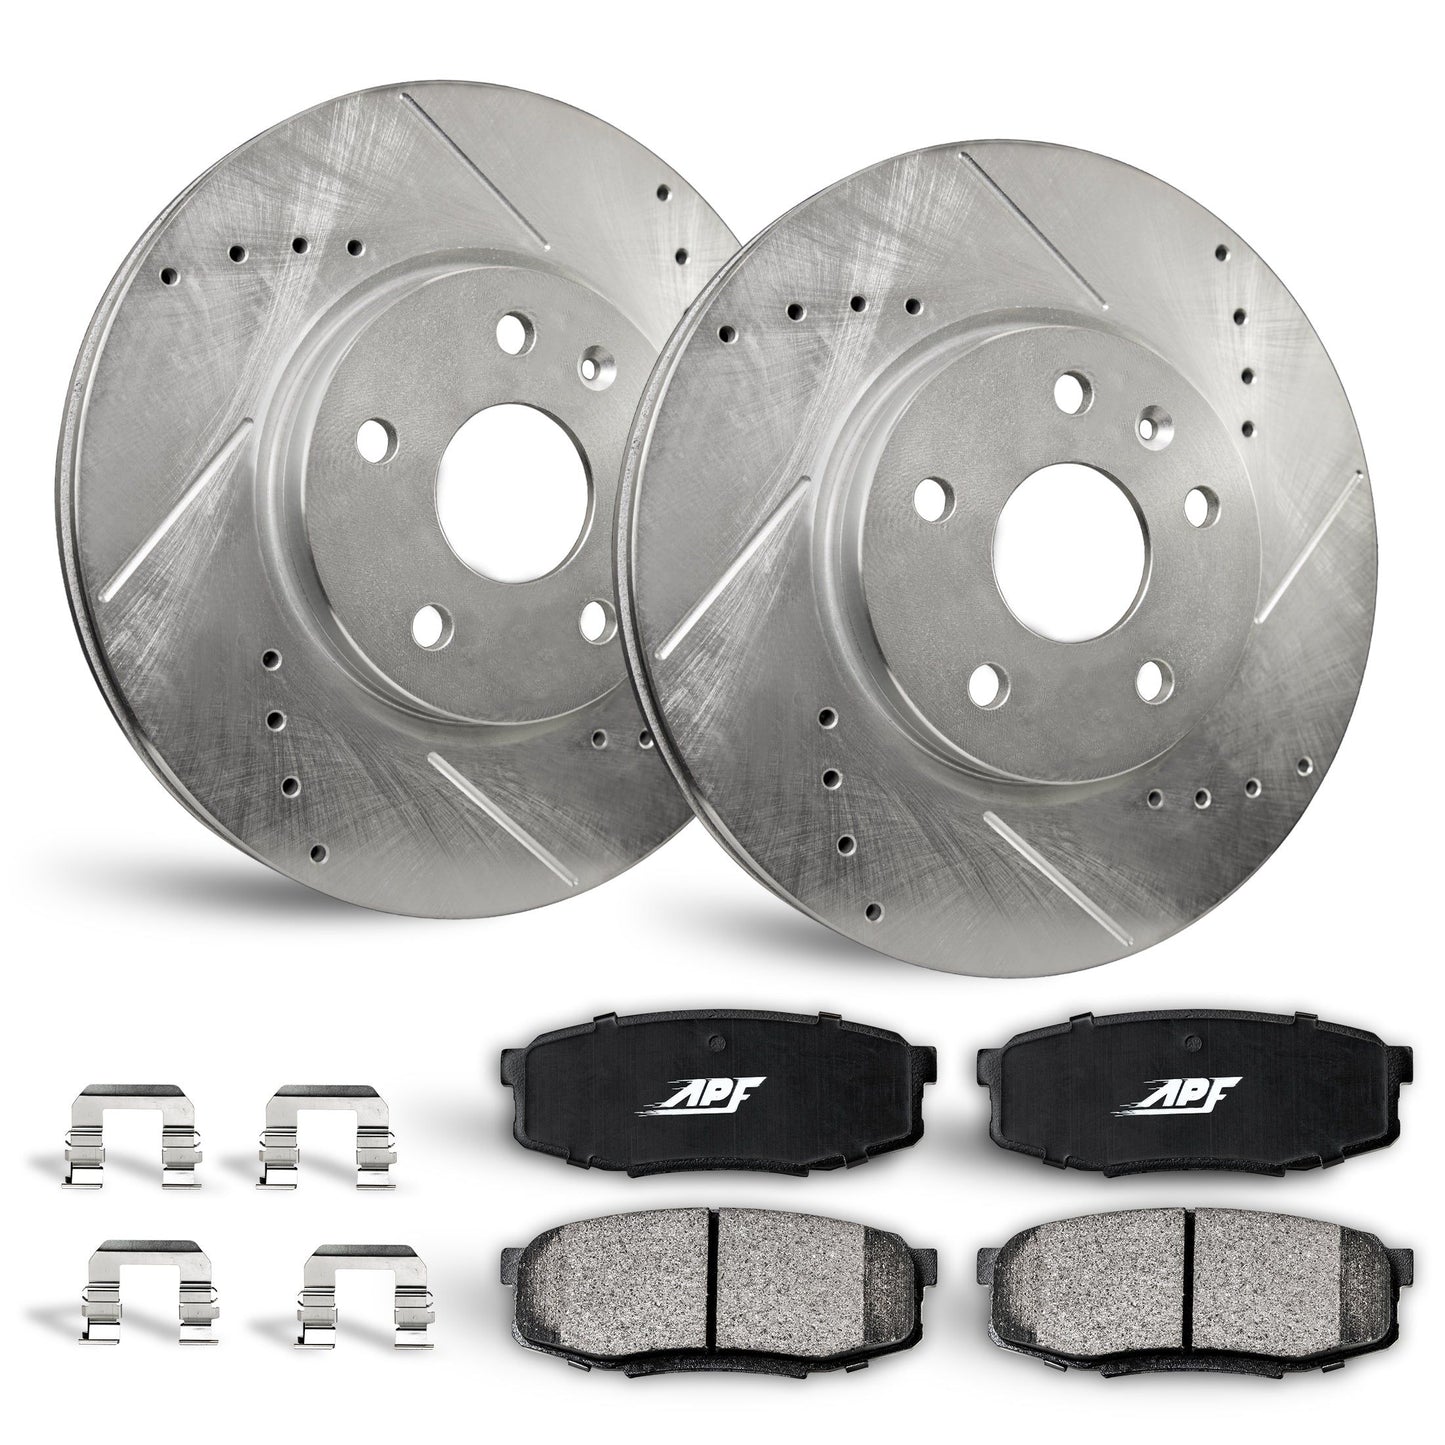 APF Front Brake Kit compatible with Acura CL 2001-2003 | Zinc Drilled Slotted Rotors with Ceramic Carbon Fiber Brake Pads